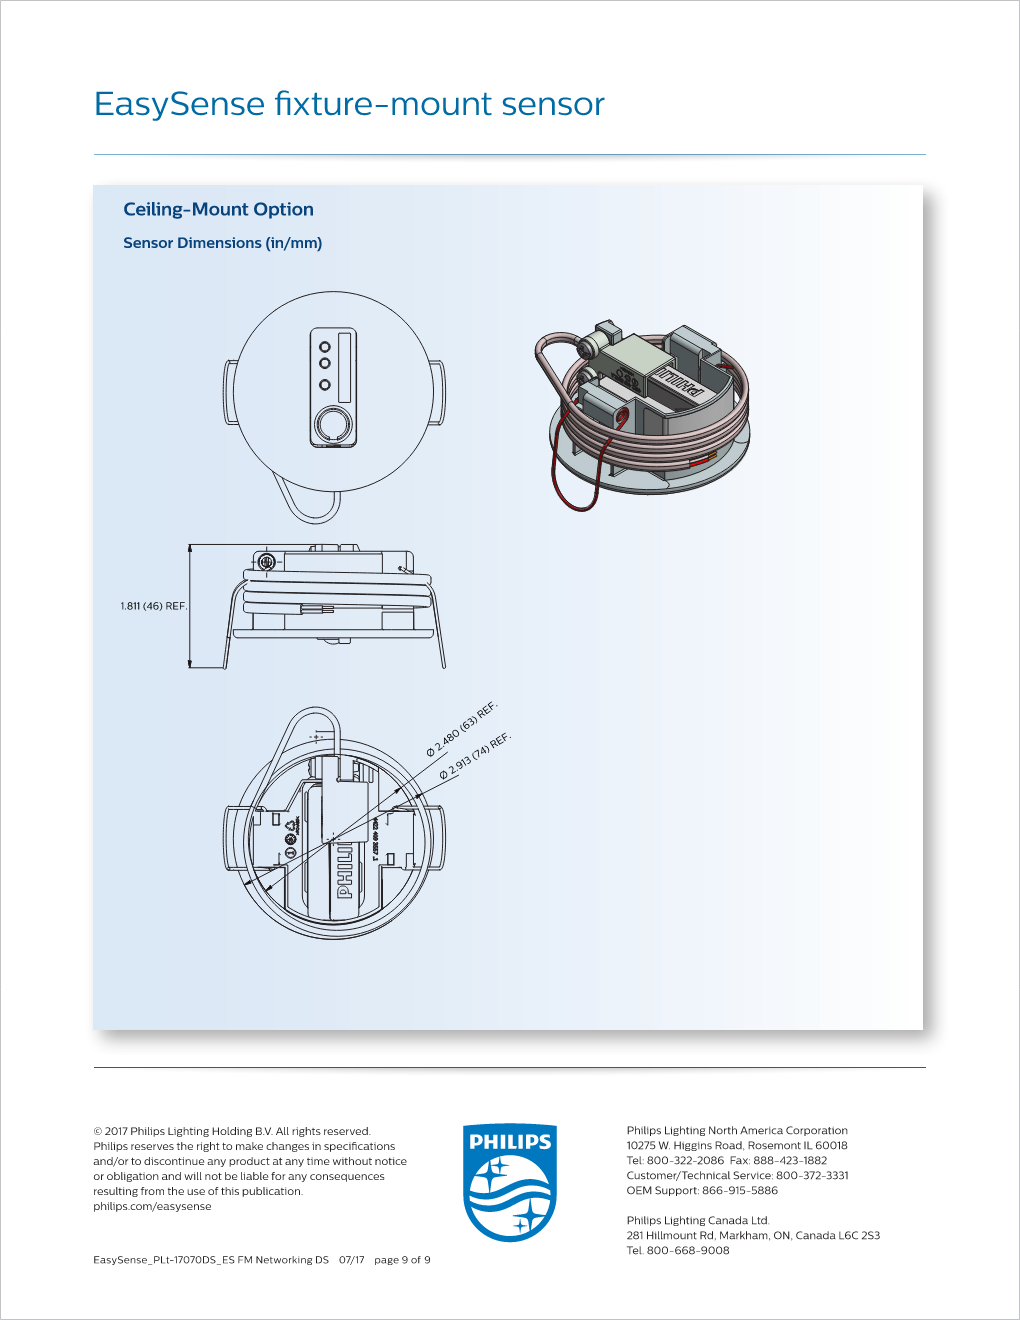 Philips_EasySense_SNS300_Fixture-Mount_for_Networking_Datasheet__PLt-17070DS__Page_009.png